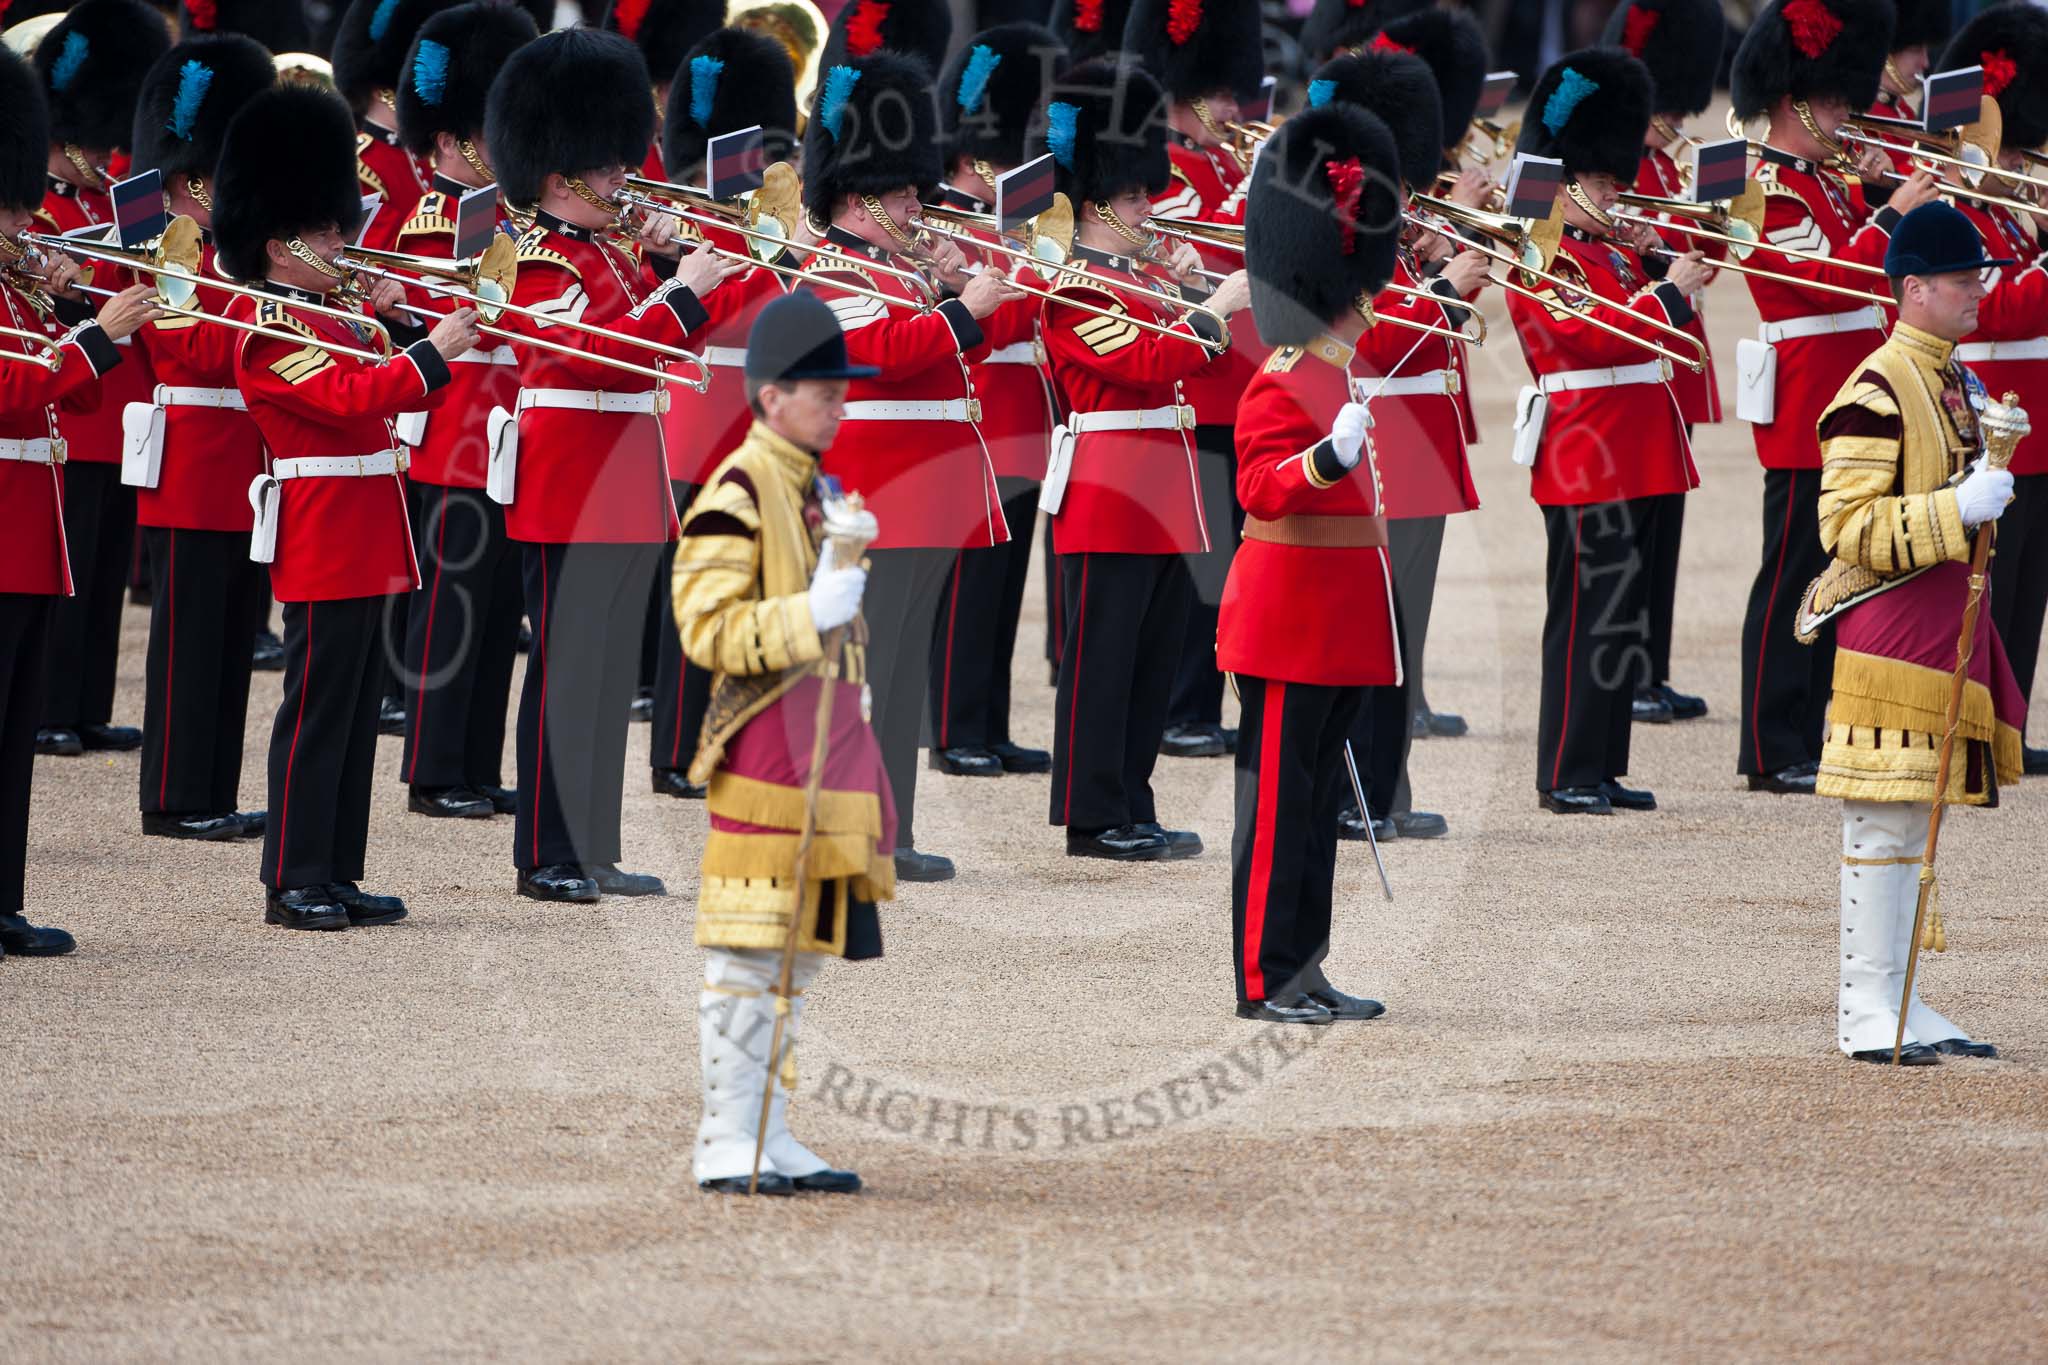 Trooping the Colour 2009: Playing during the Inspection of the Line - the Massed Bands, with the Senior Director of Music, Lieutenant Colonel G O Jones, Coldstream Guardsm in the centre..
Horse Guards Parade, Westminster,
London SW1,

United Kingdom,
on 13 June 2009 at 11:05, image #149